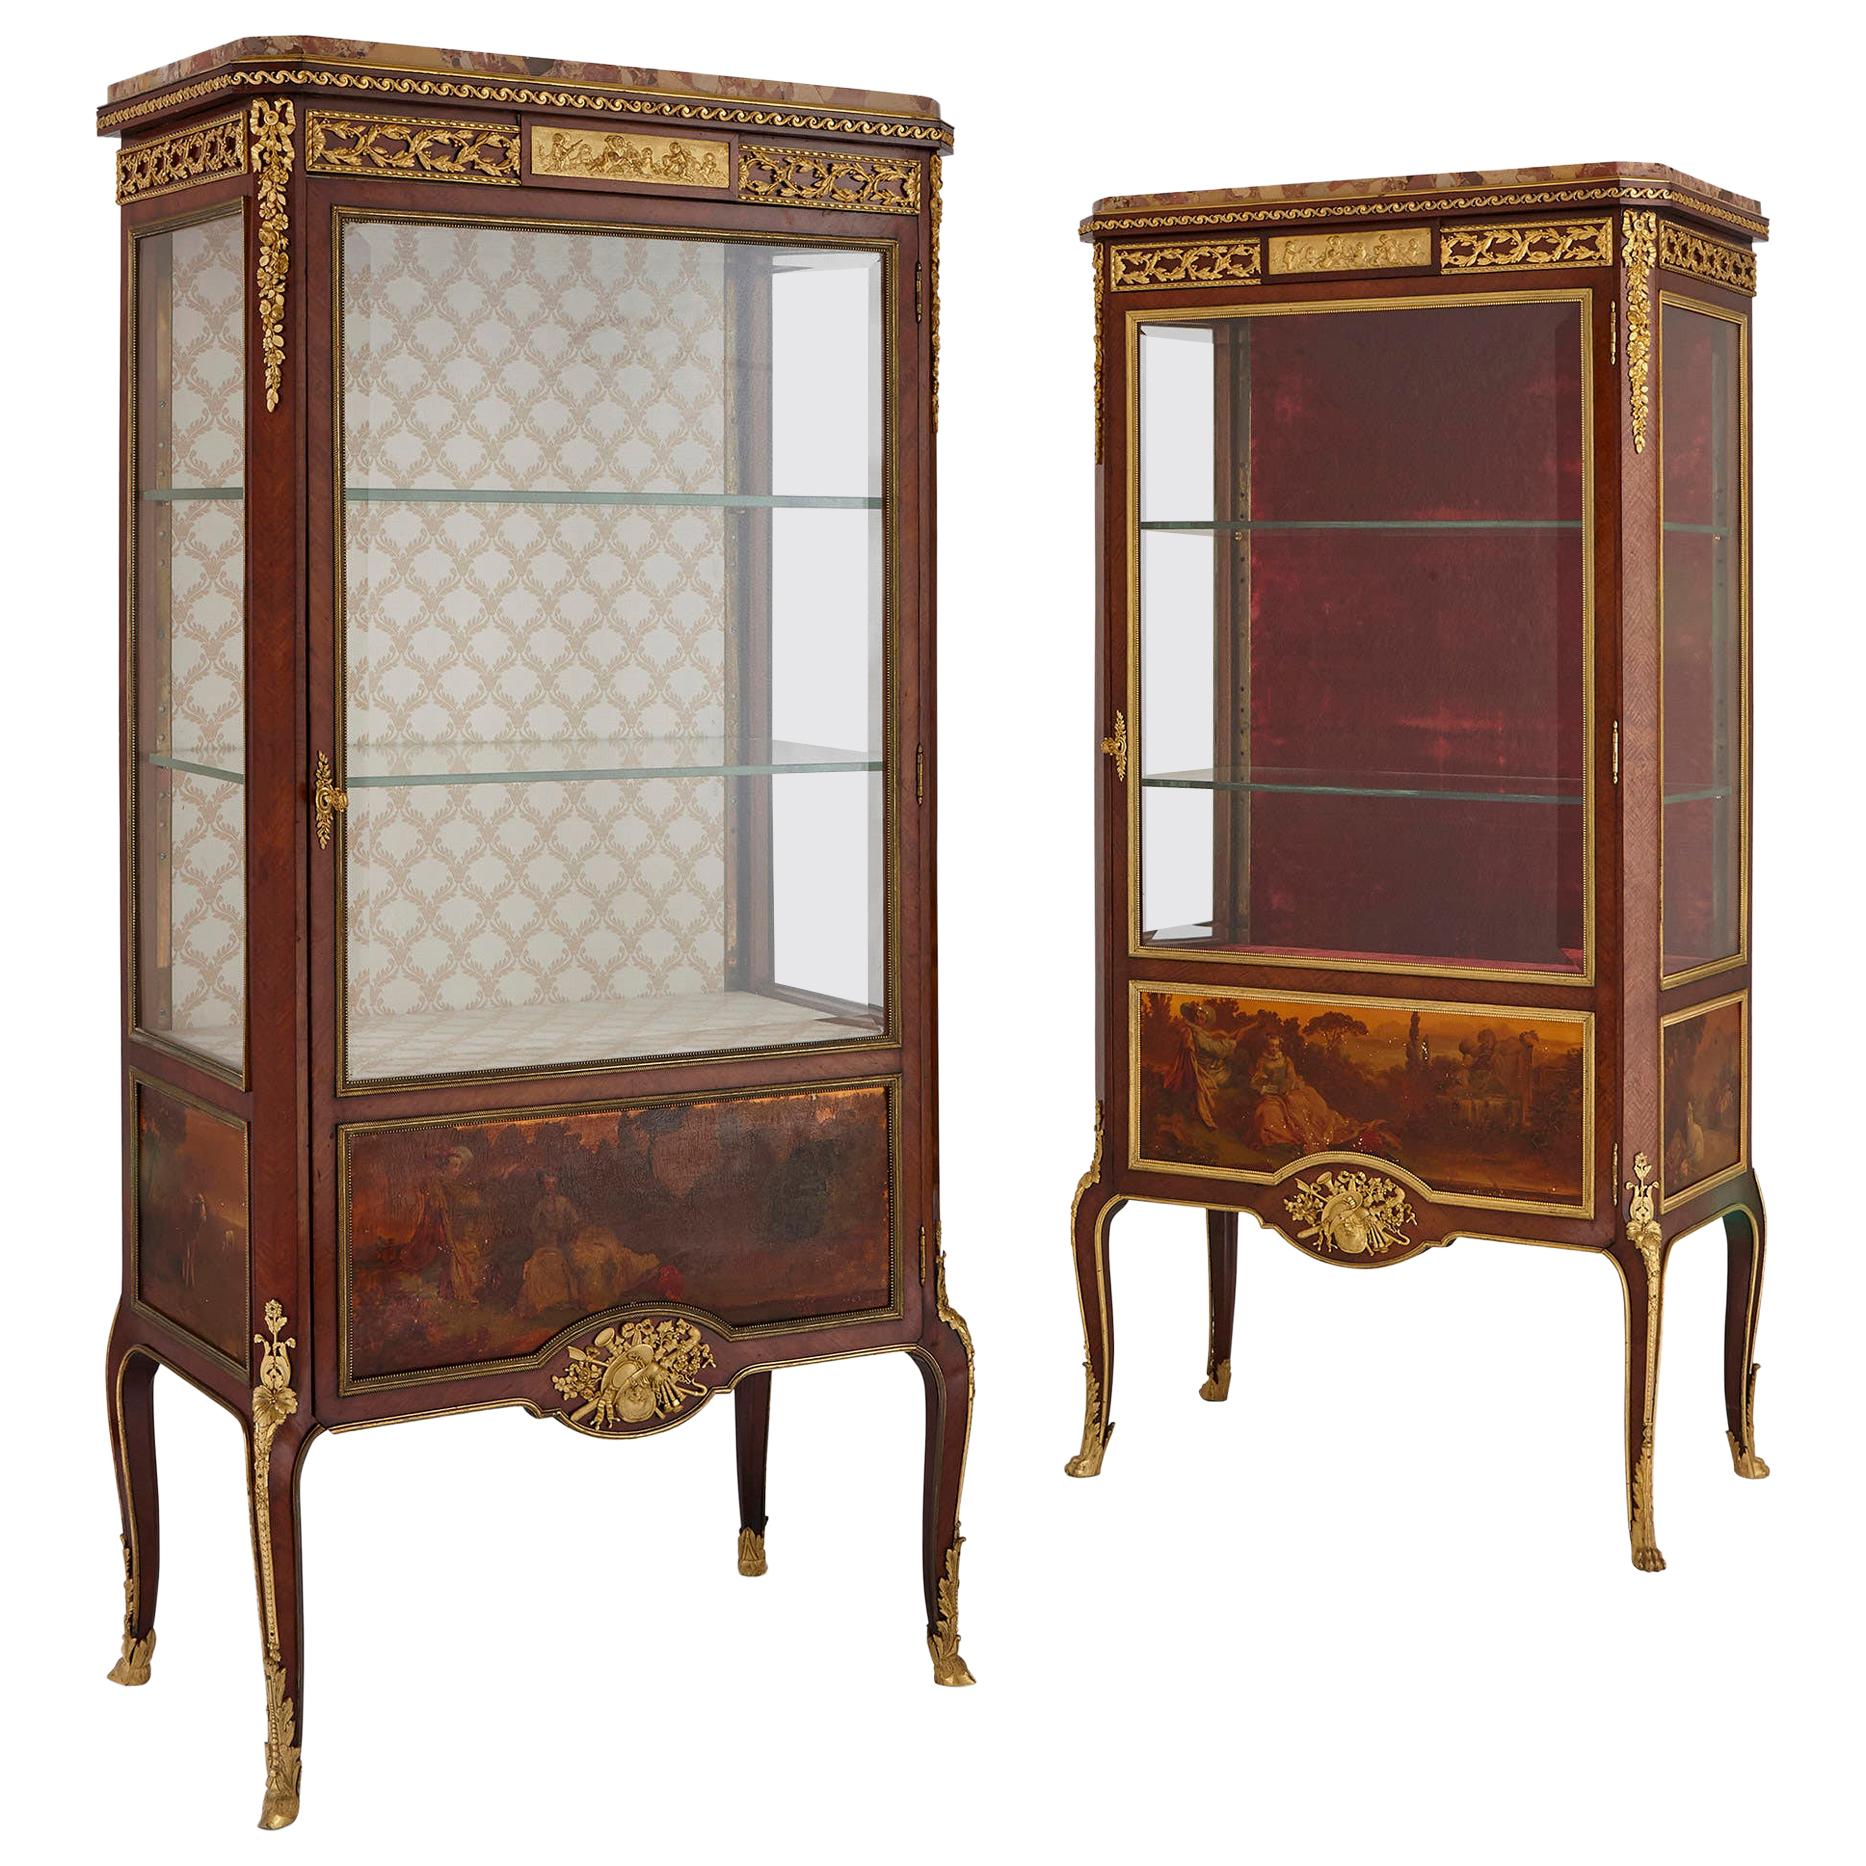 Two Vernis Martin and Gilt Bronze Mounted Display Cabinets by Linke